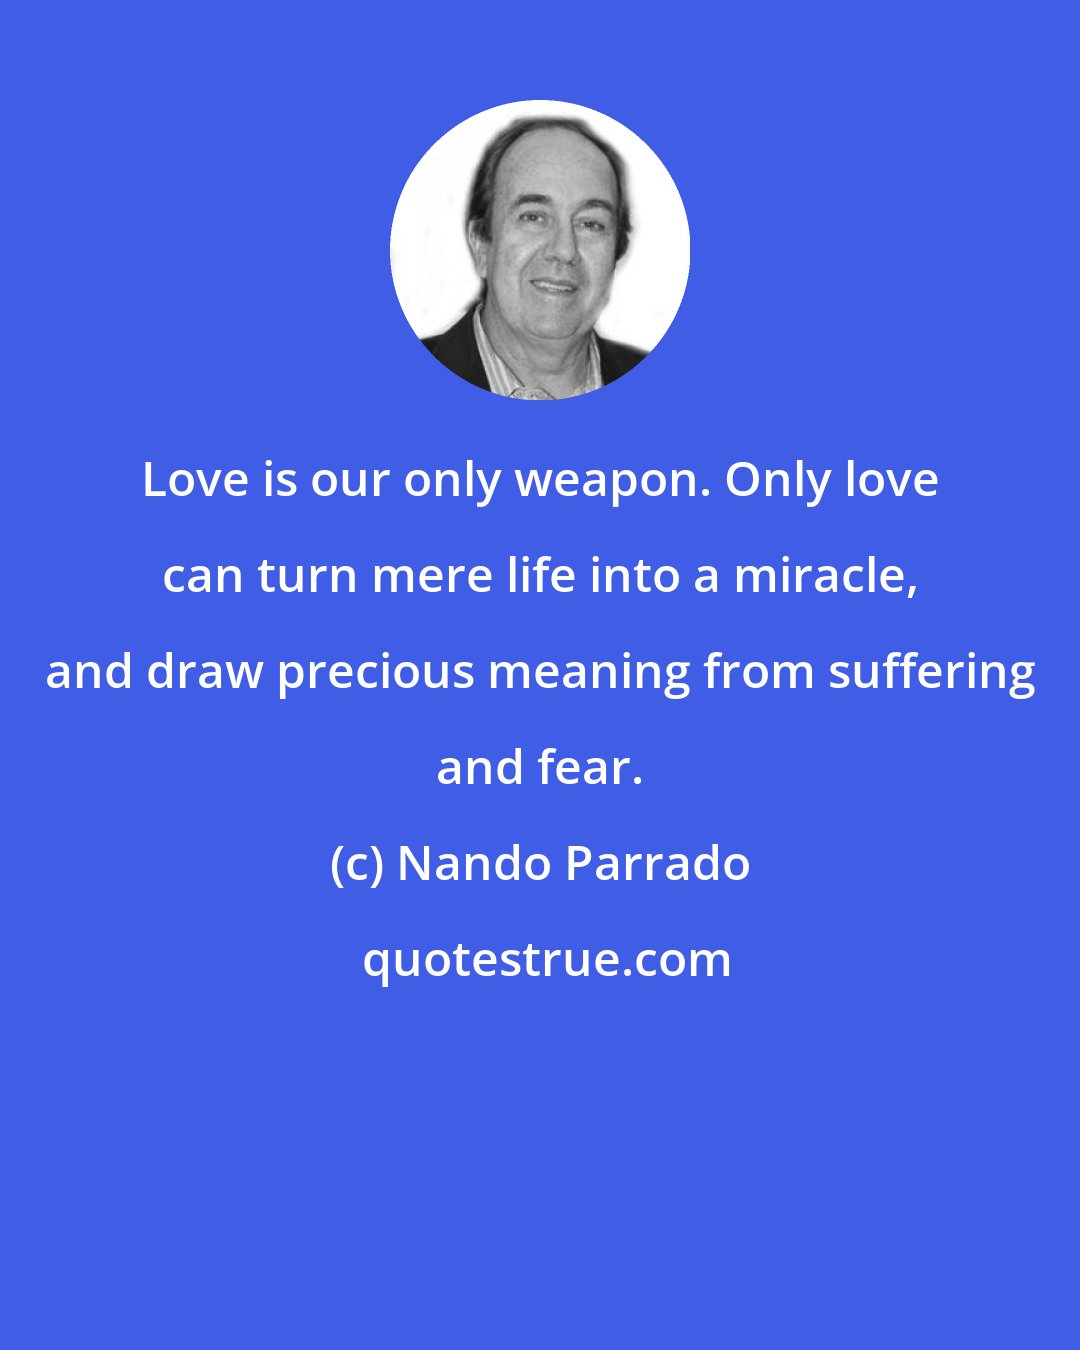 Nando Parrado: Love is our only weapon. Only love can turn mere life into a miracle, and draw precious meaning from suffering and fear.